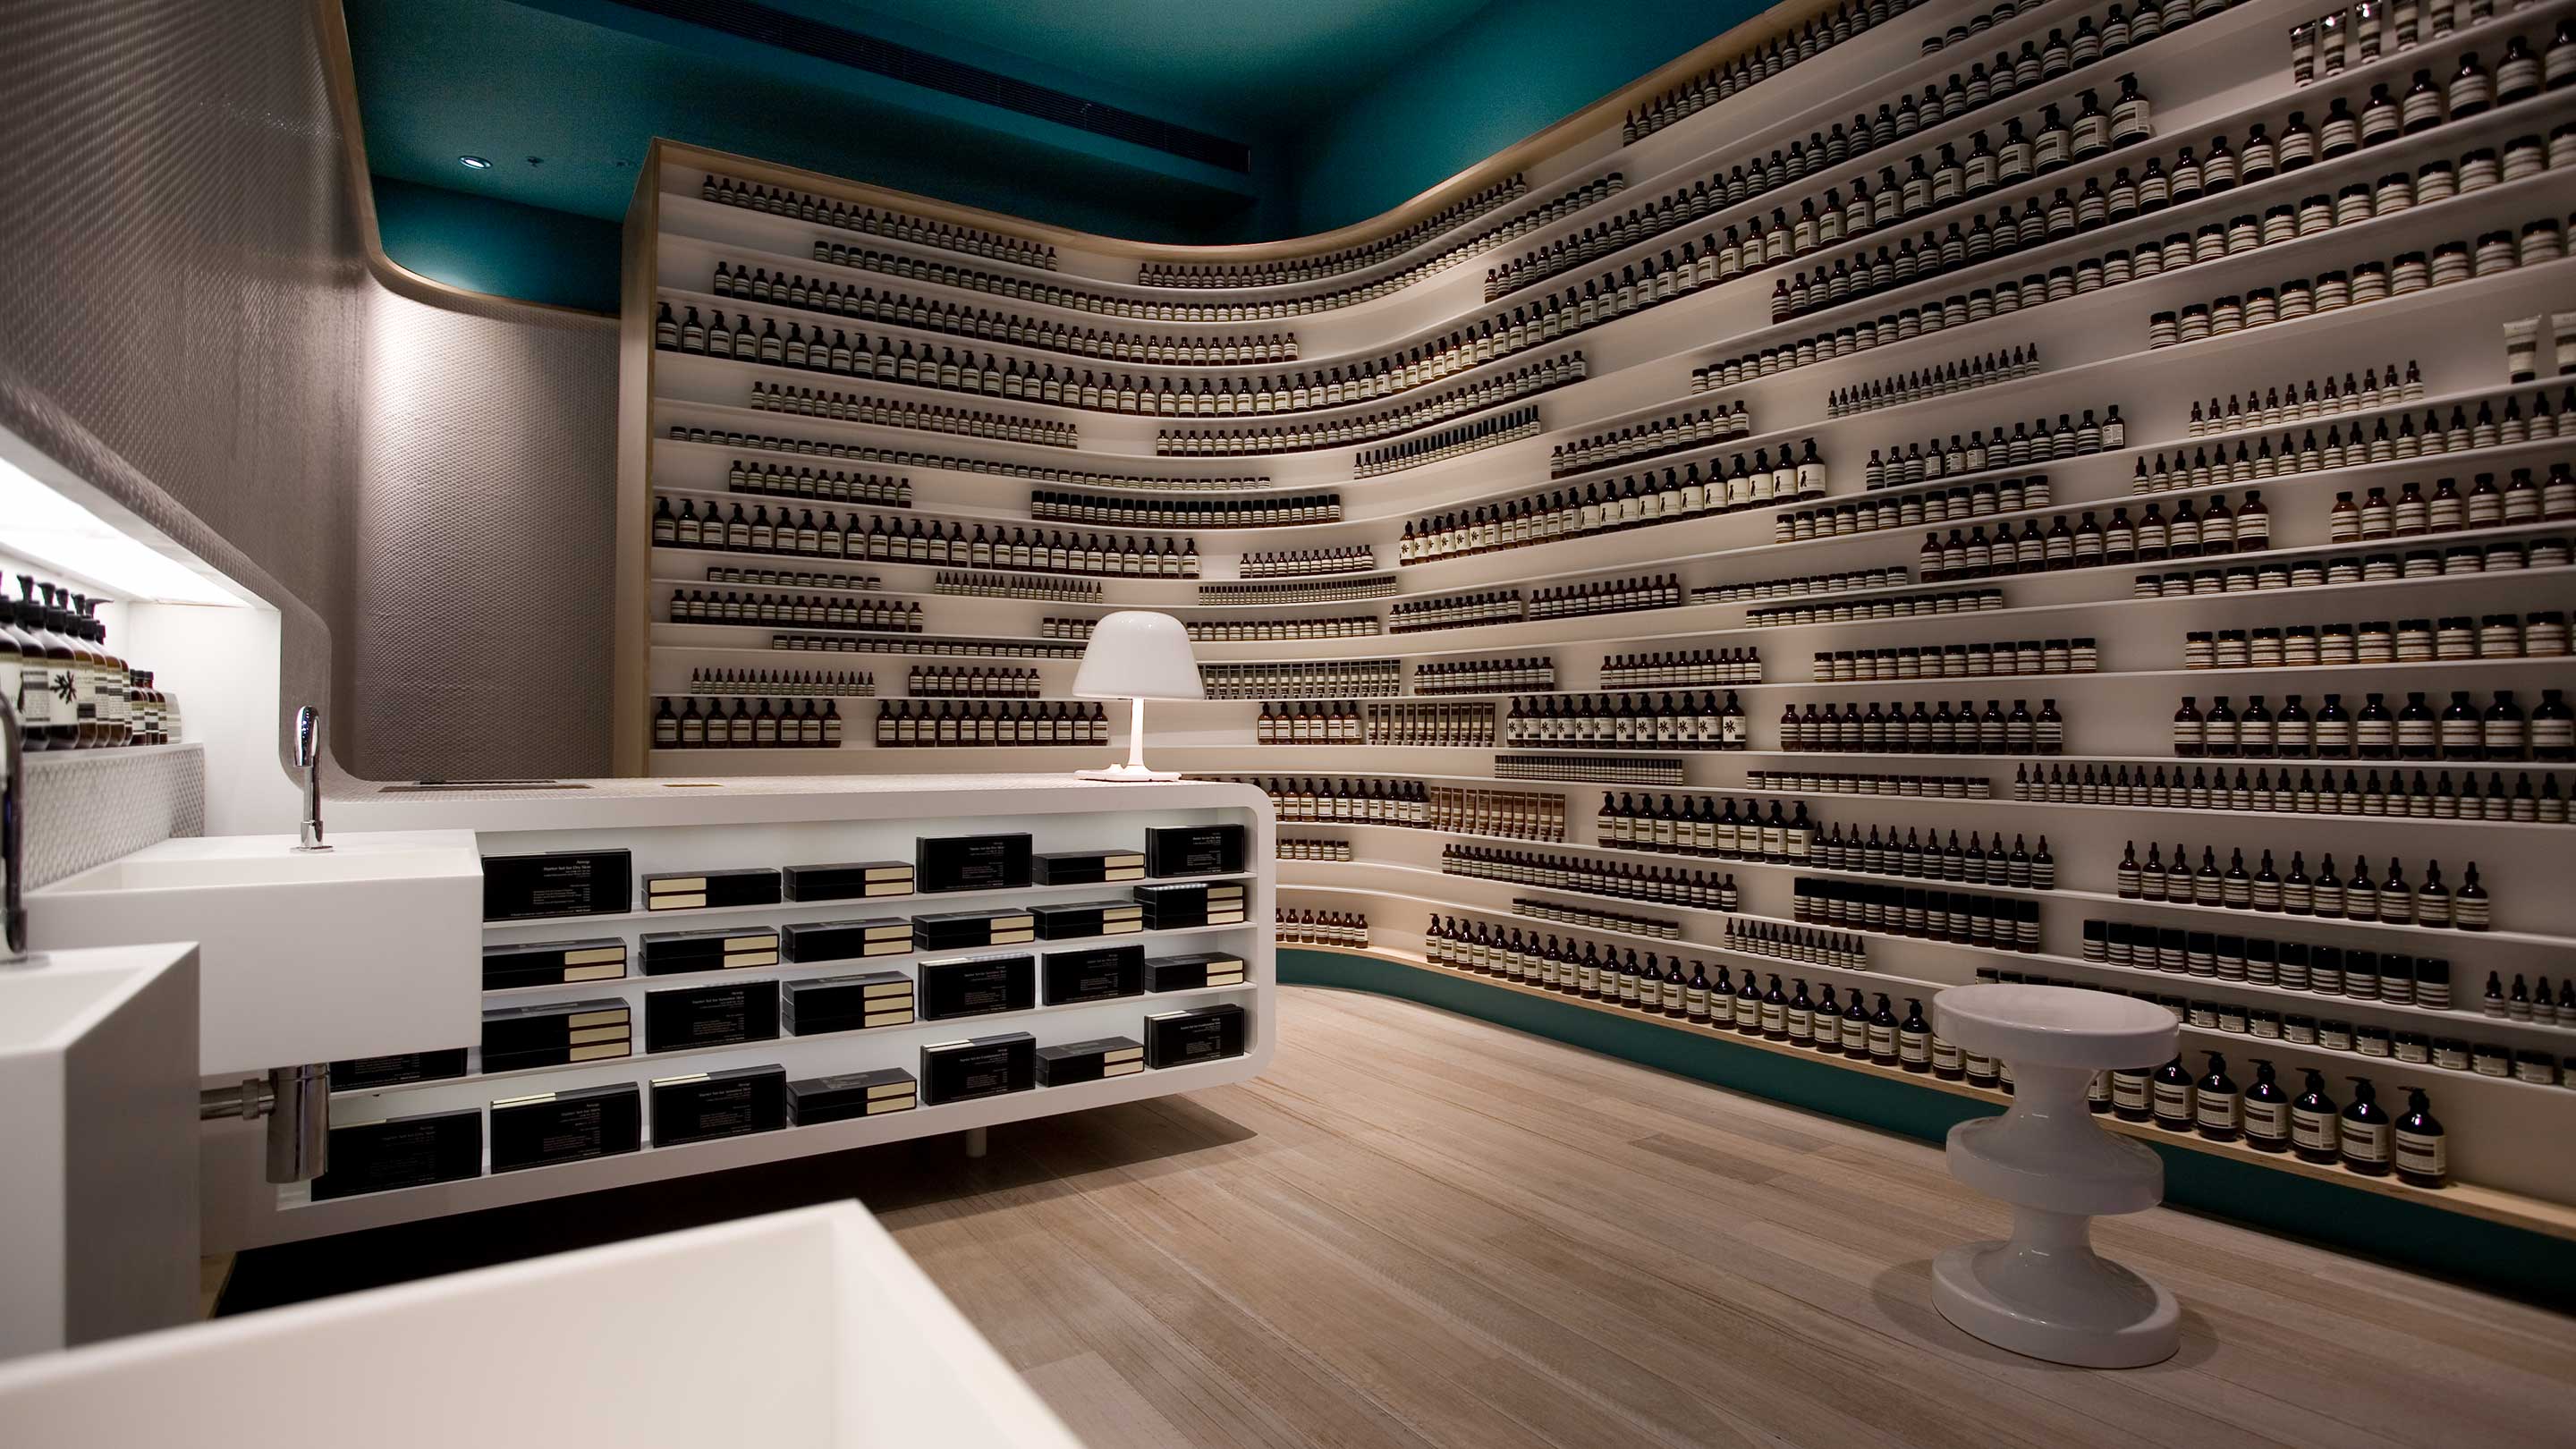 White store counter situated in a dark room, with shelving displaying Aesop products